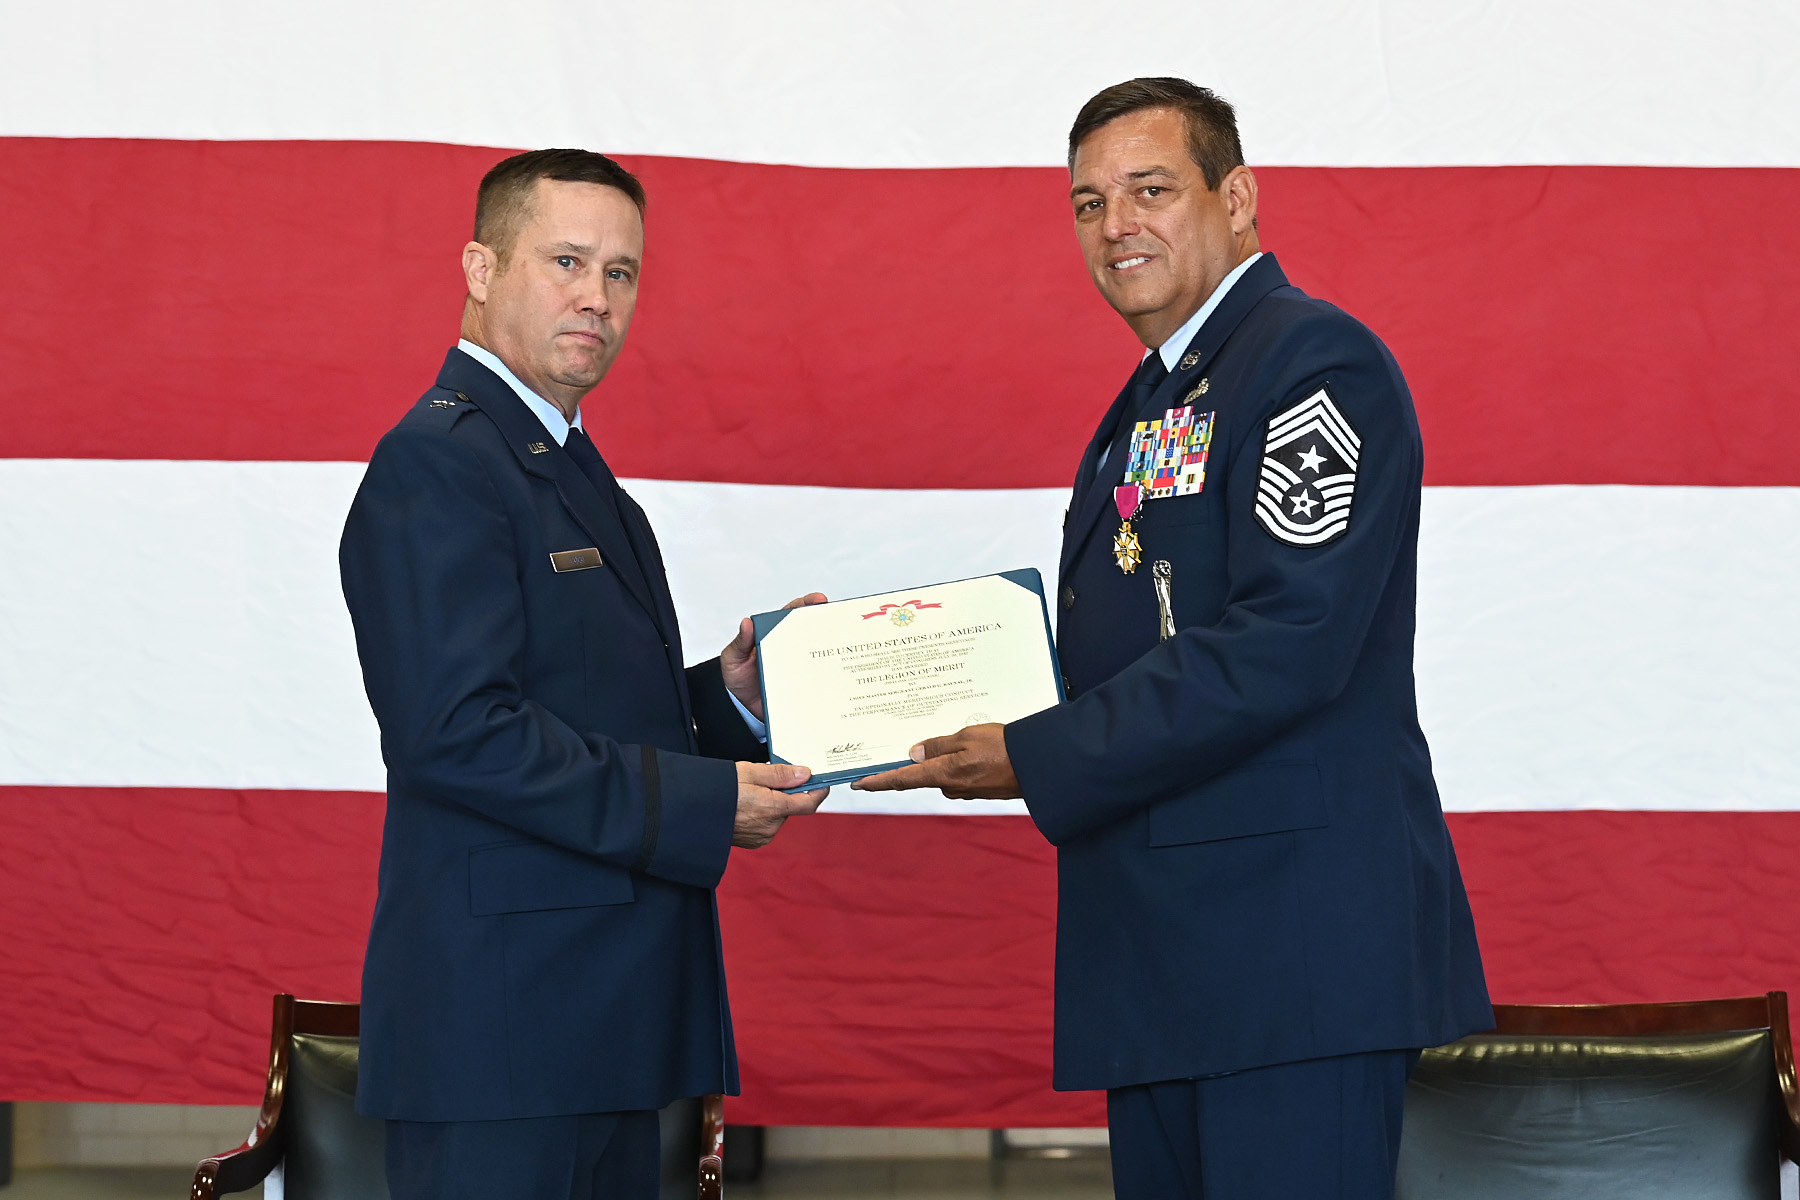 La. Air National Guard senior leader retires after 39 years